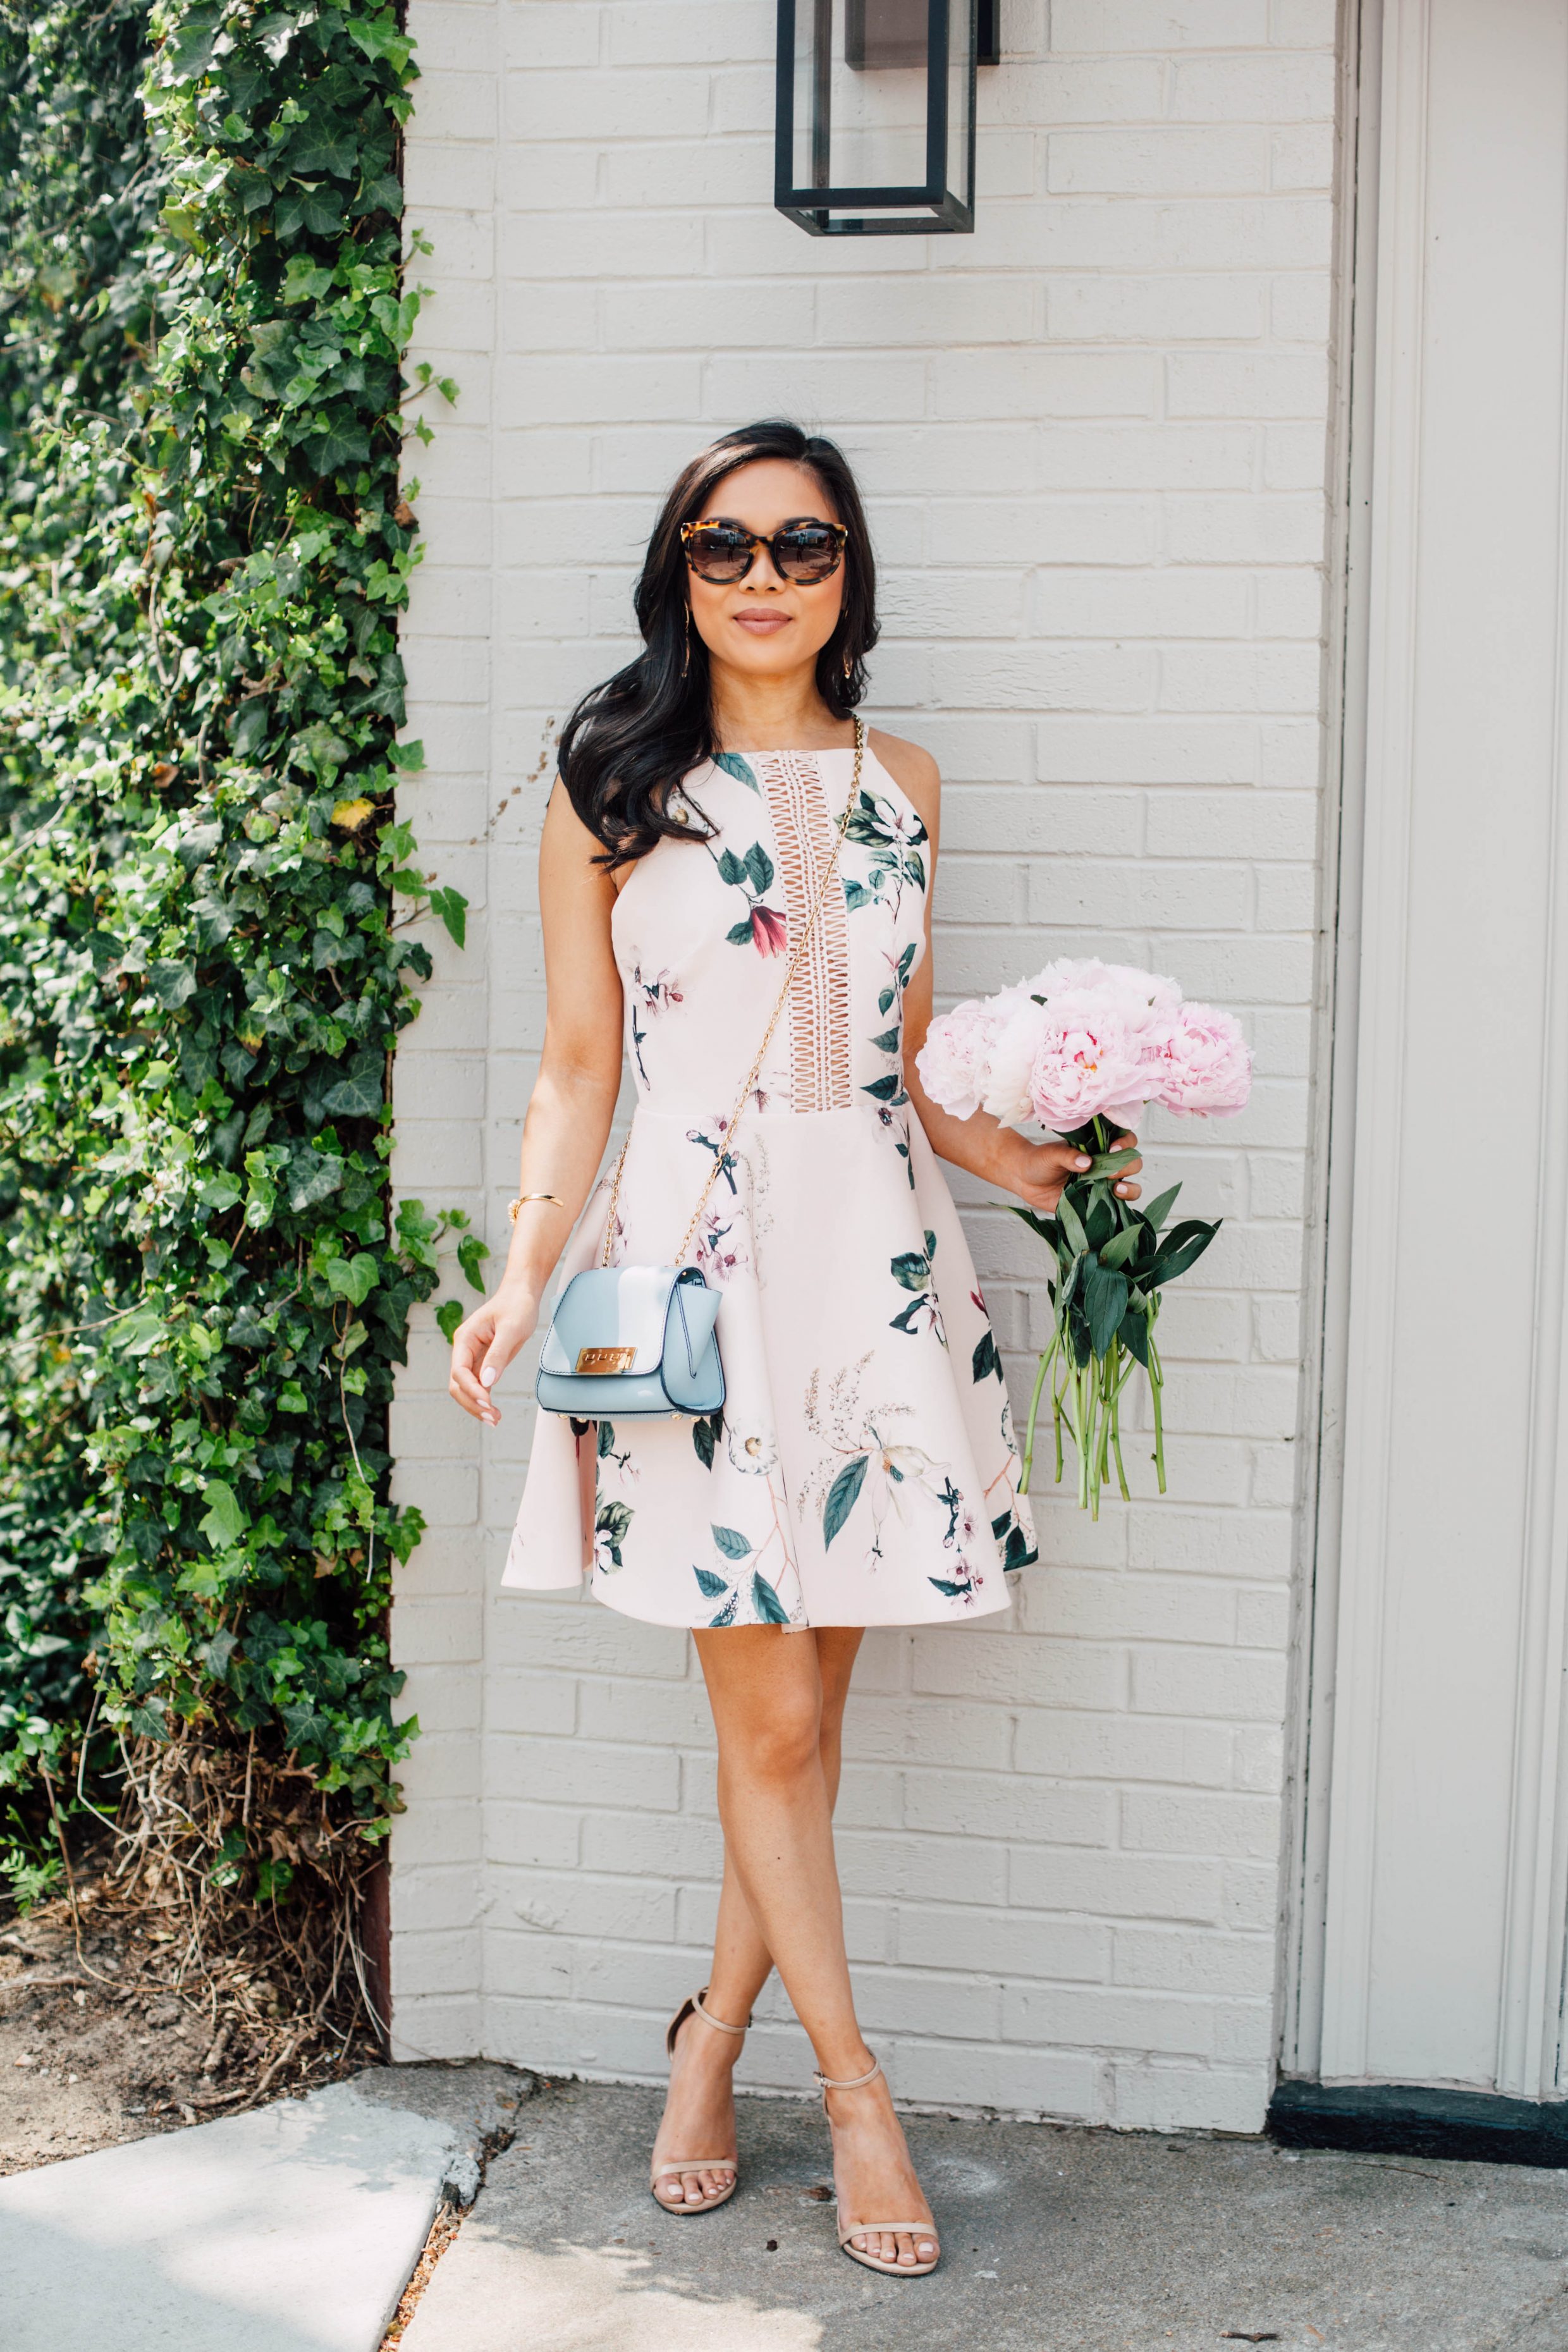 Floral Do It Right Mini Dress with Pink Peonies